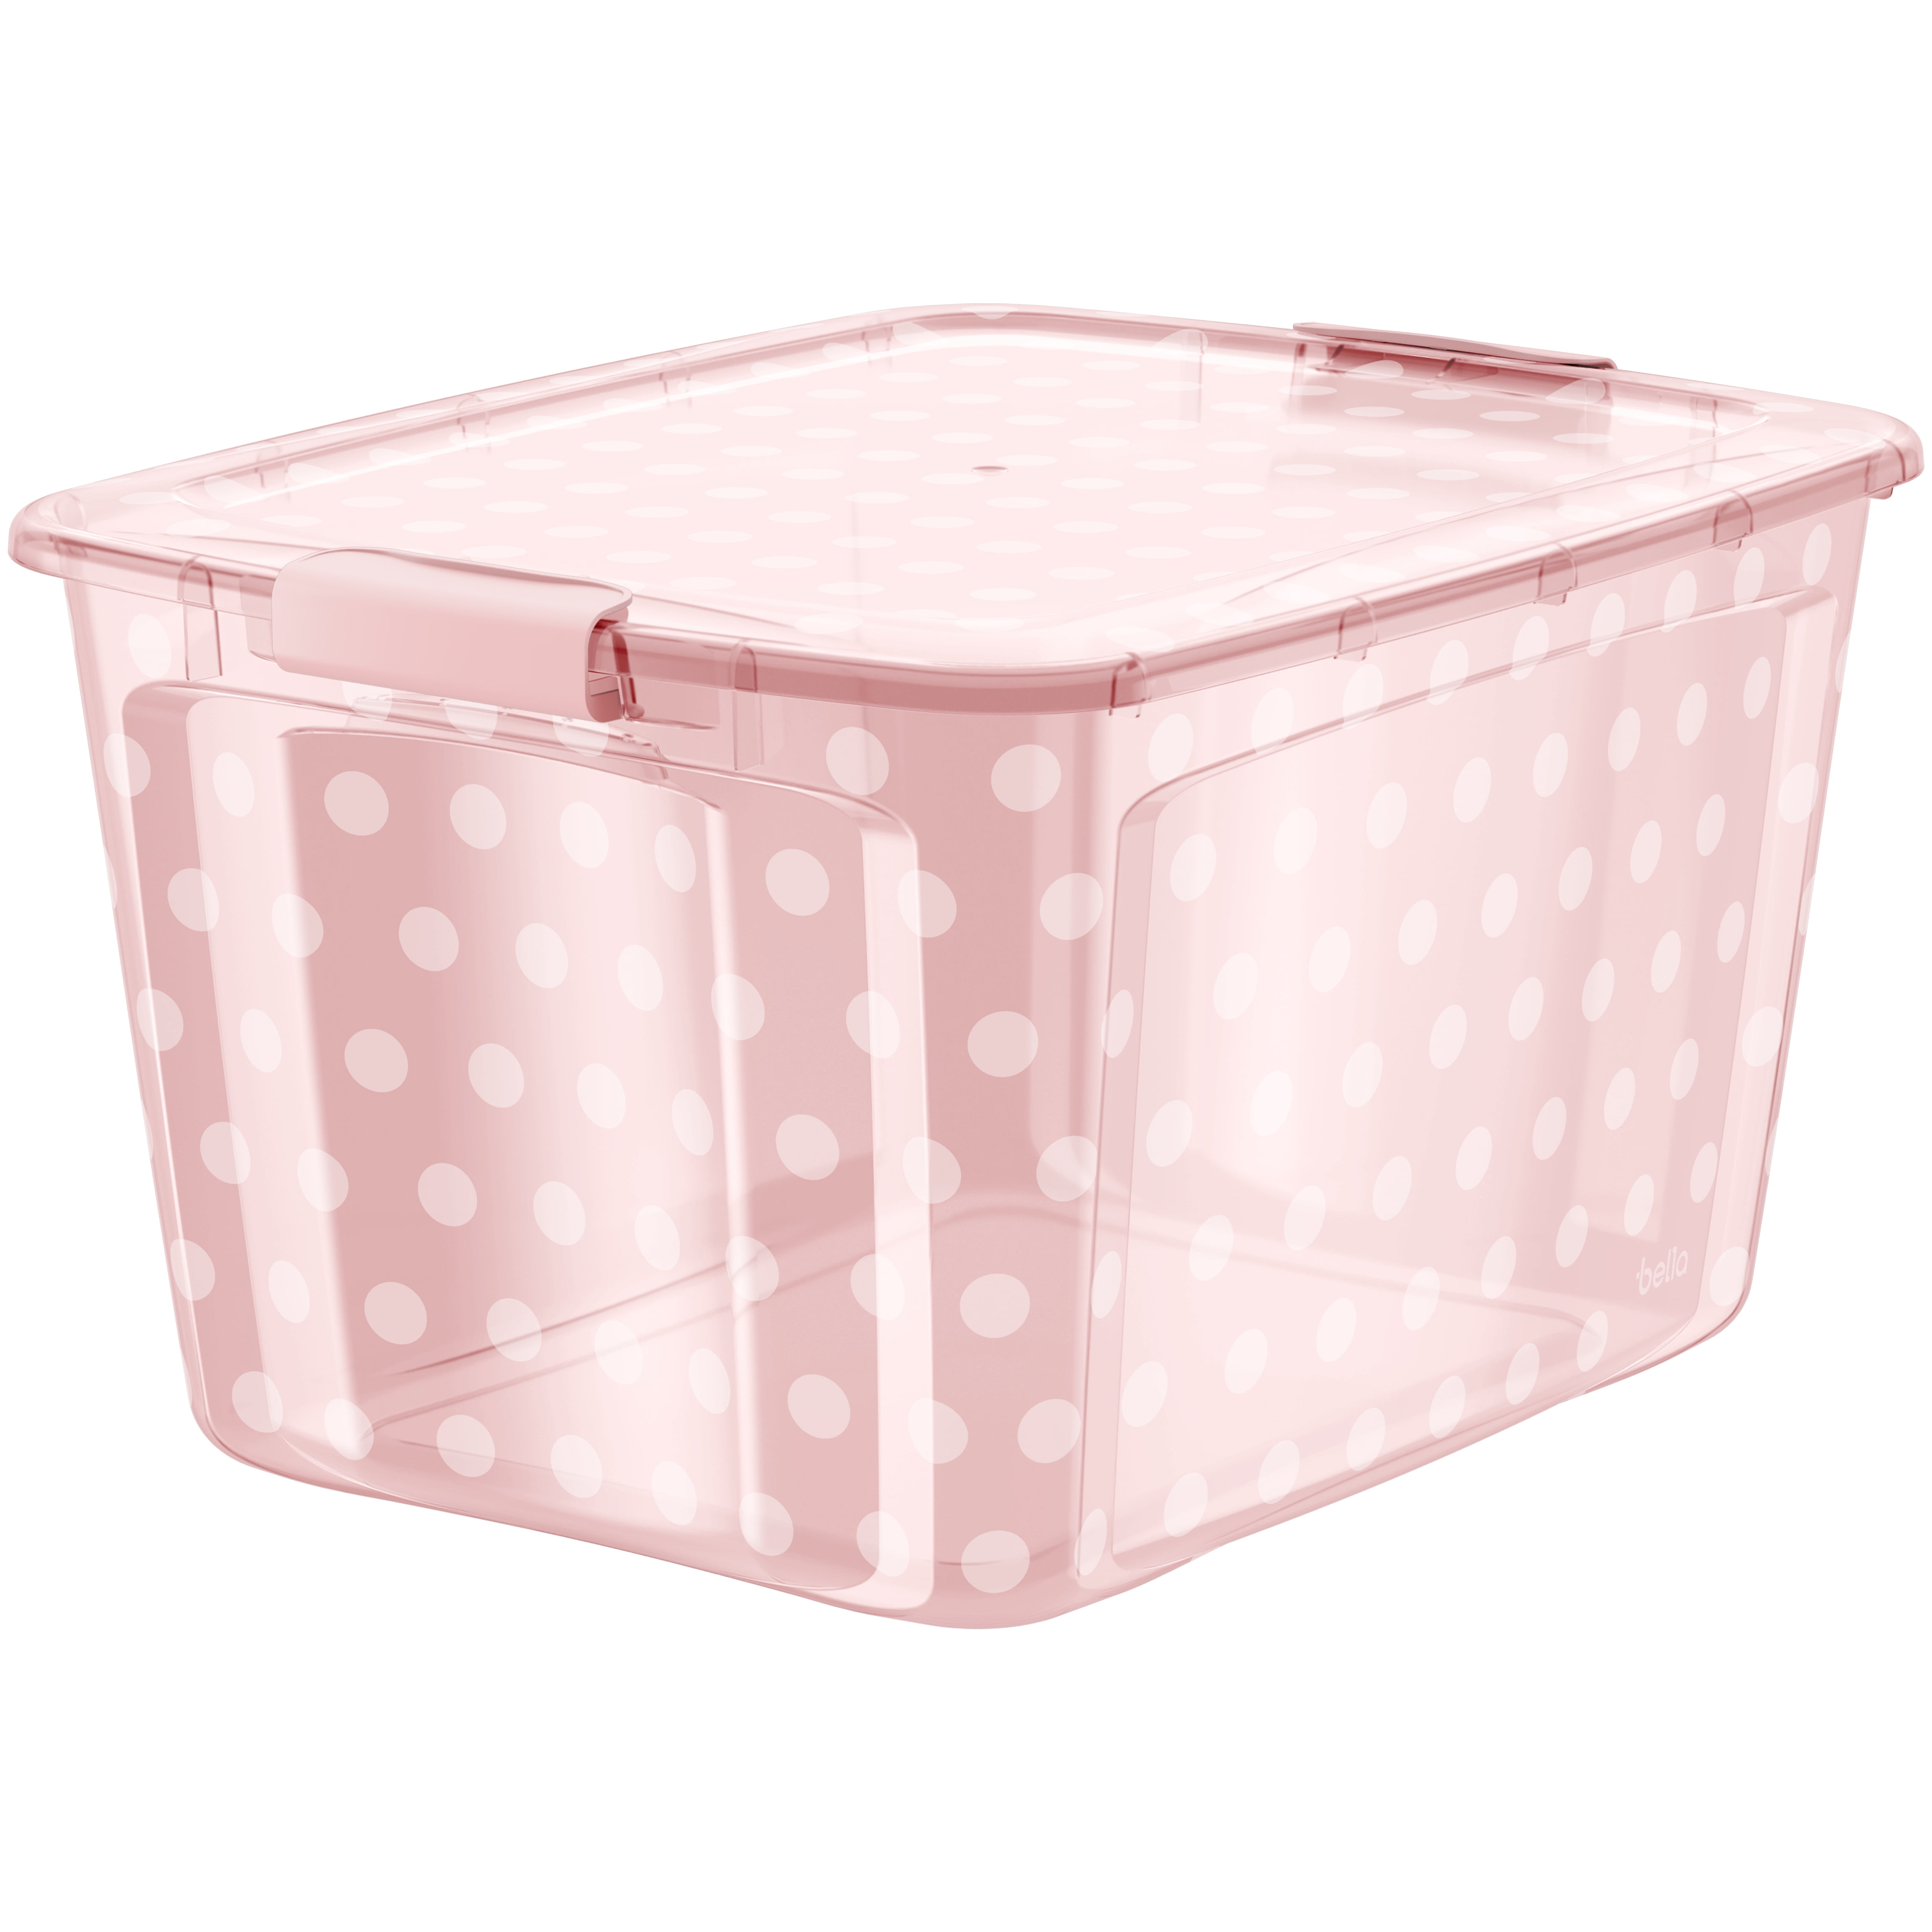 at Home Pink Tinted Storage Container with Dual Hinging Lid, (52L)